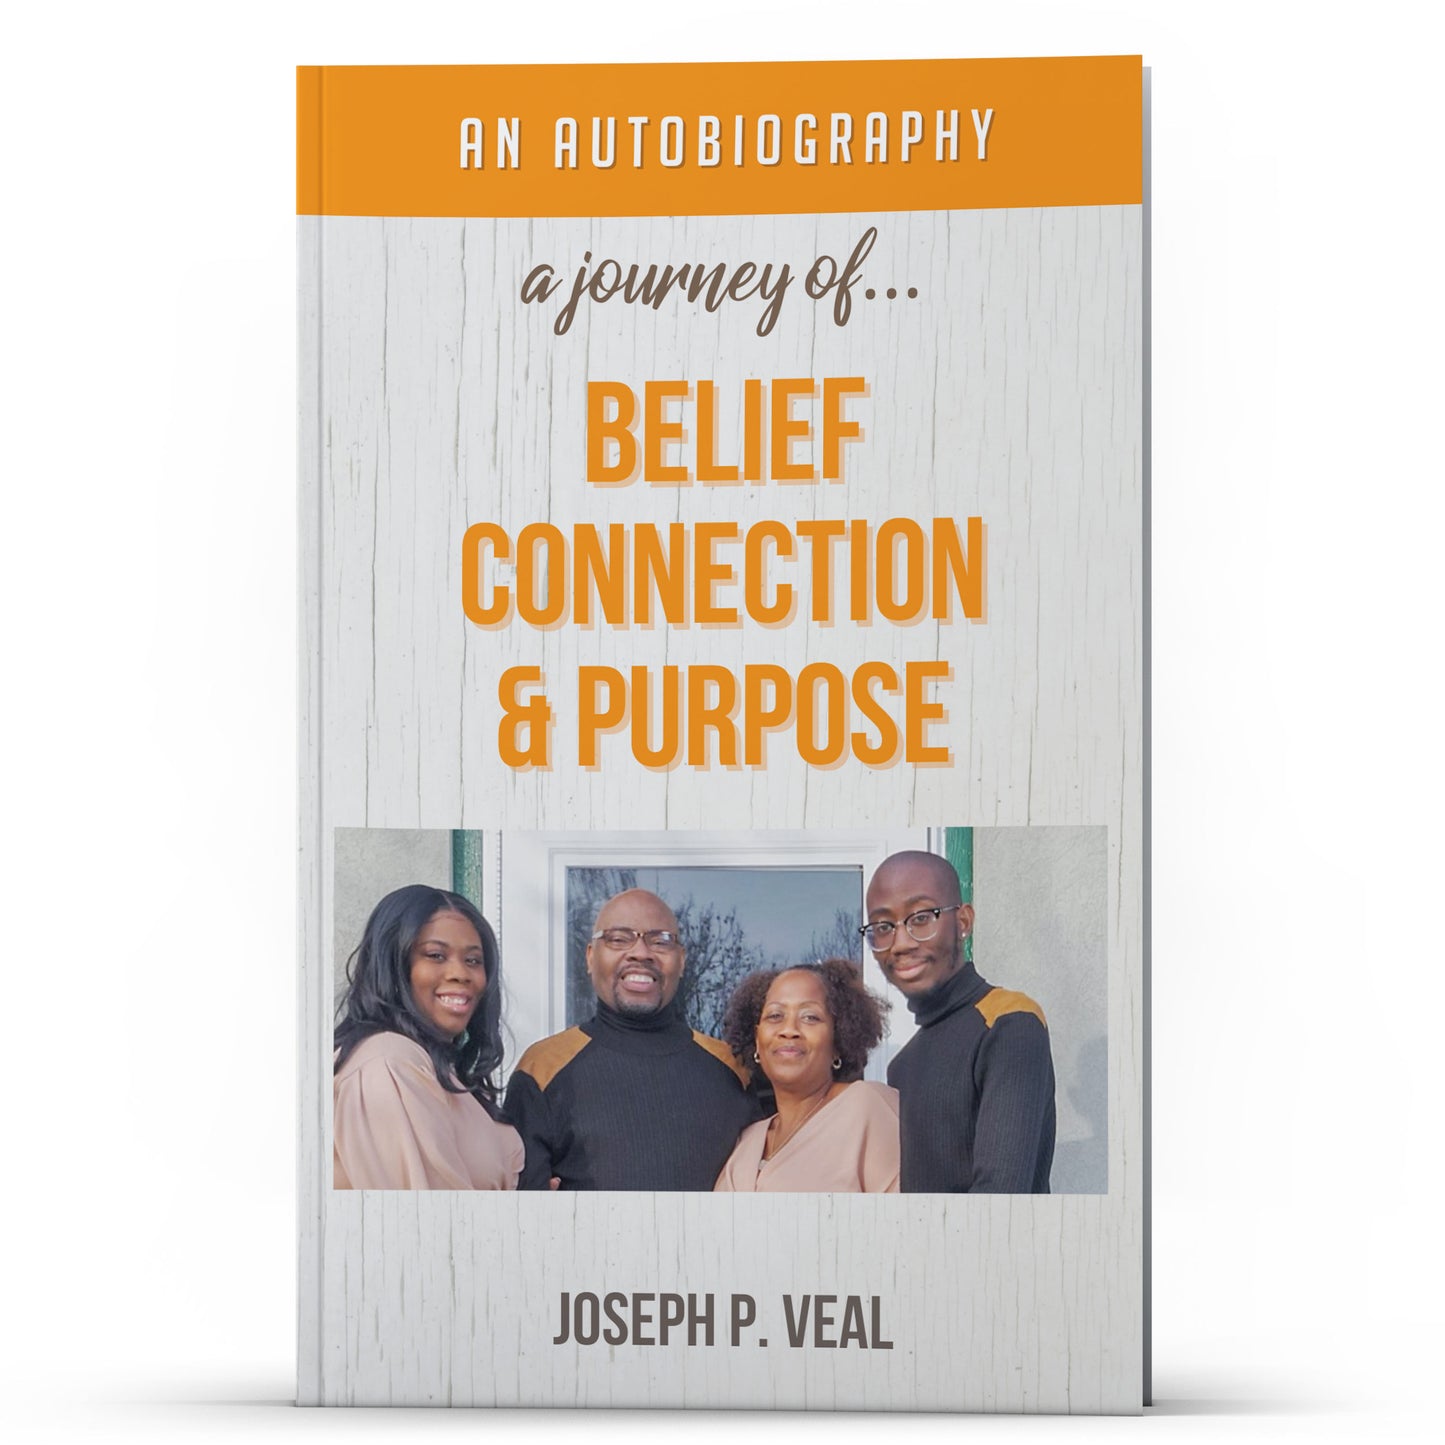 A Journey of BELIEF, CONNECTION AND PURPOSE